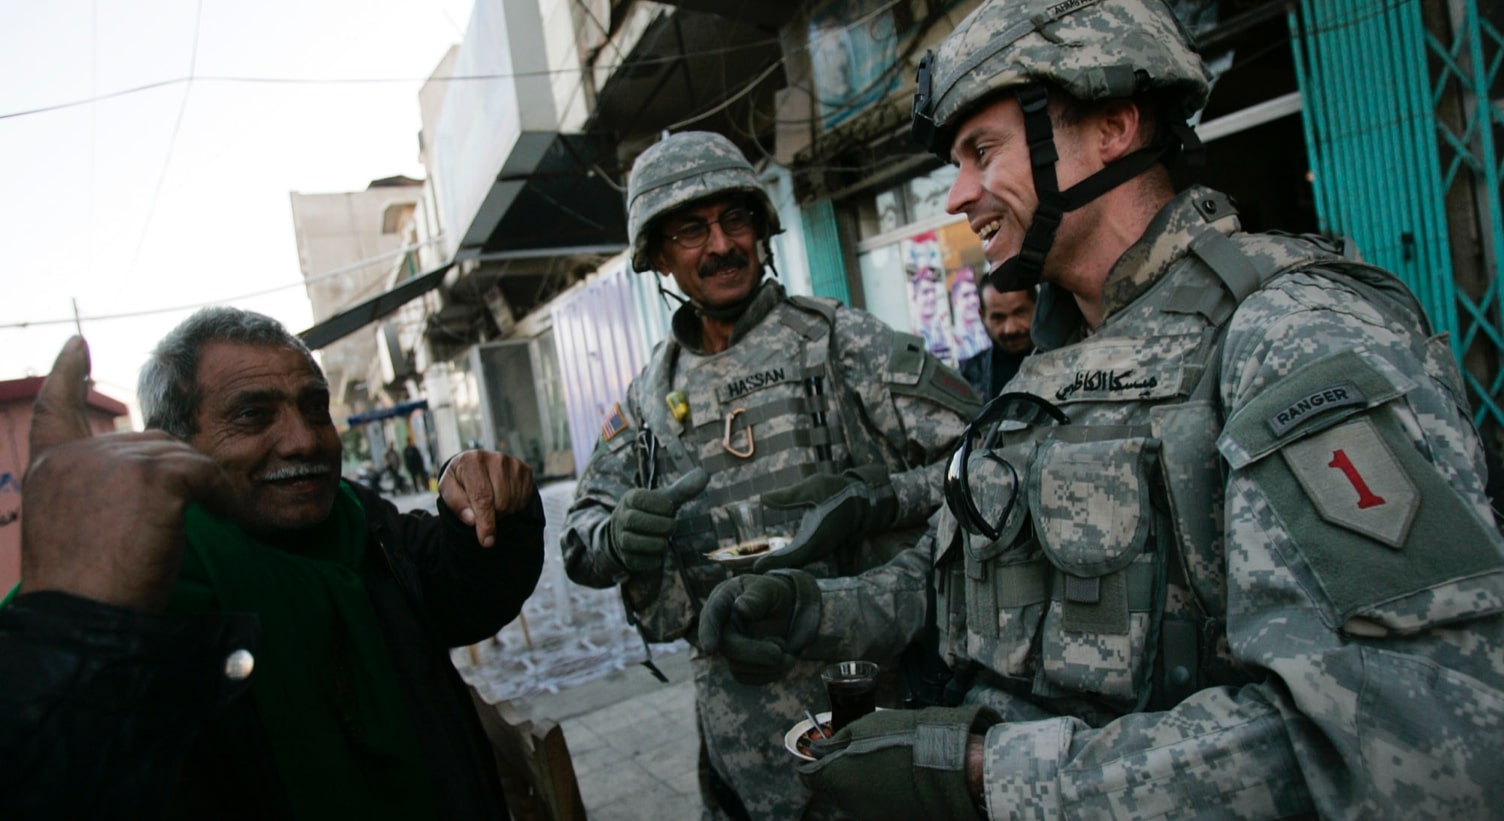 Steve Miska (right), on the streets of Baghdad with his interpreter, Hassan. Photo credit: Chris Hondros, Getty Images, 2007